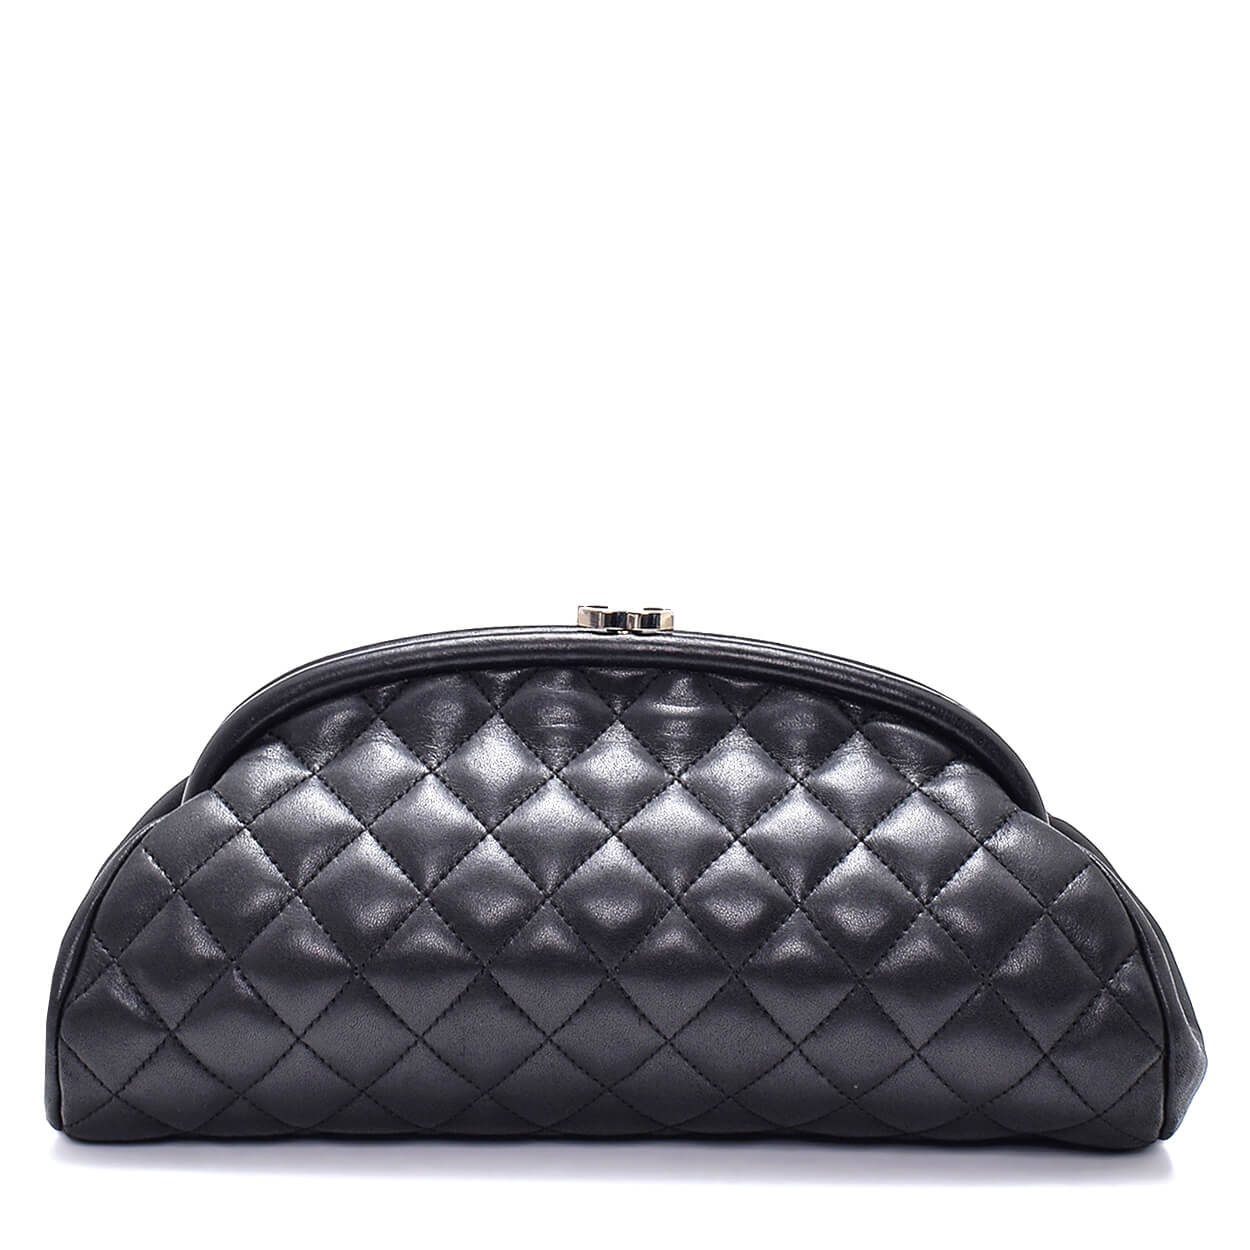 Chanel - Black Quilted Leather Timeless CC Clutch